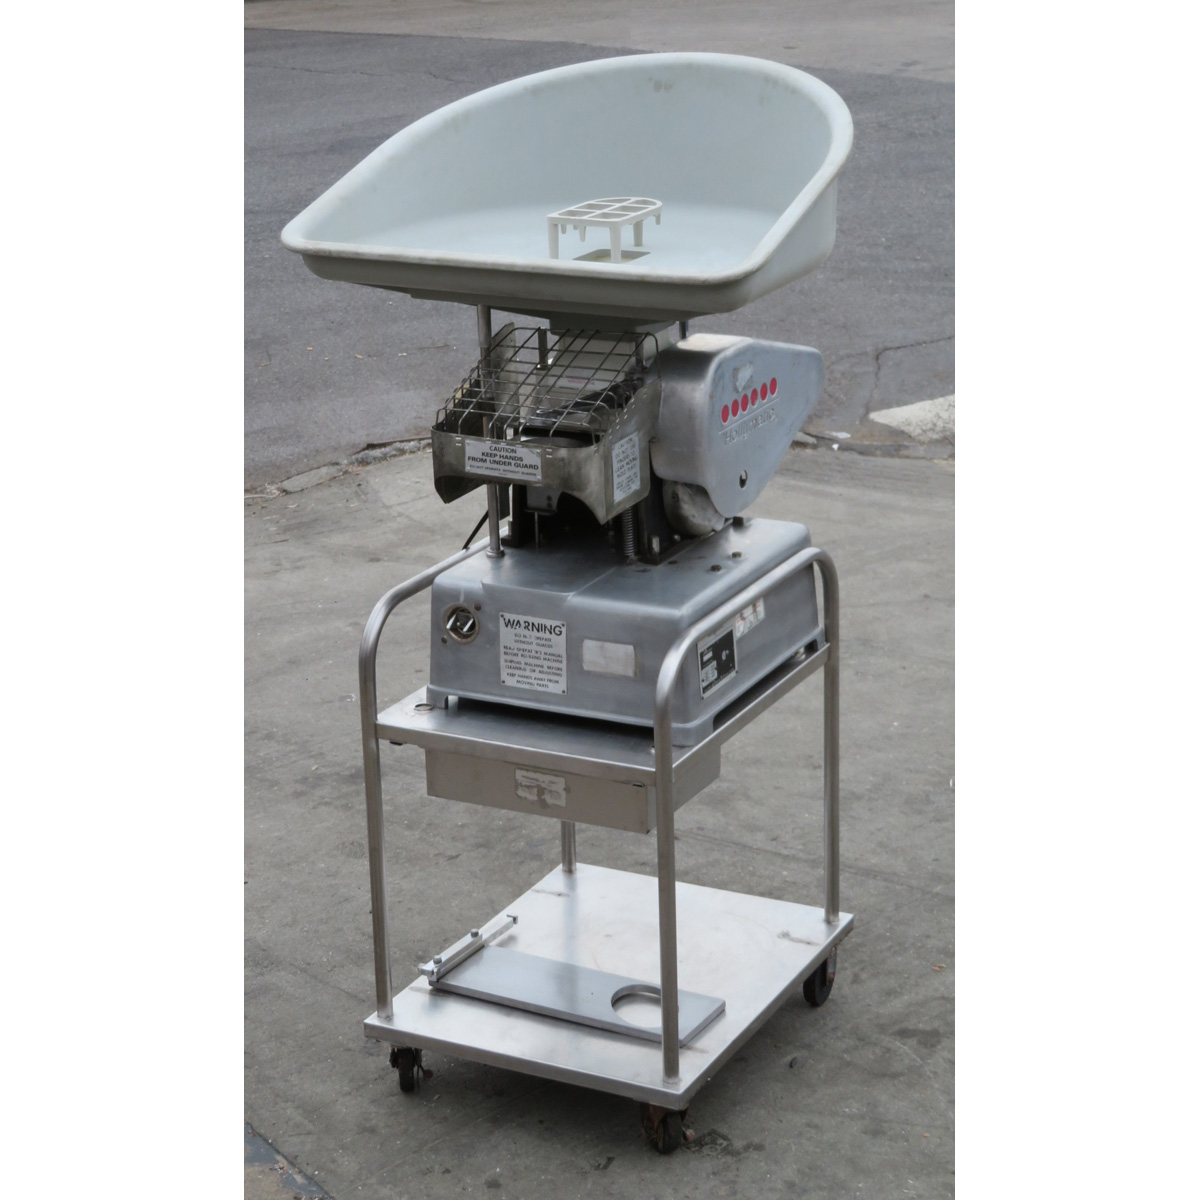 Hollymatic SUPER-54 Patty Maker, Used Excellent Condition